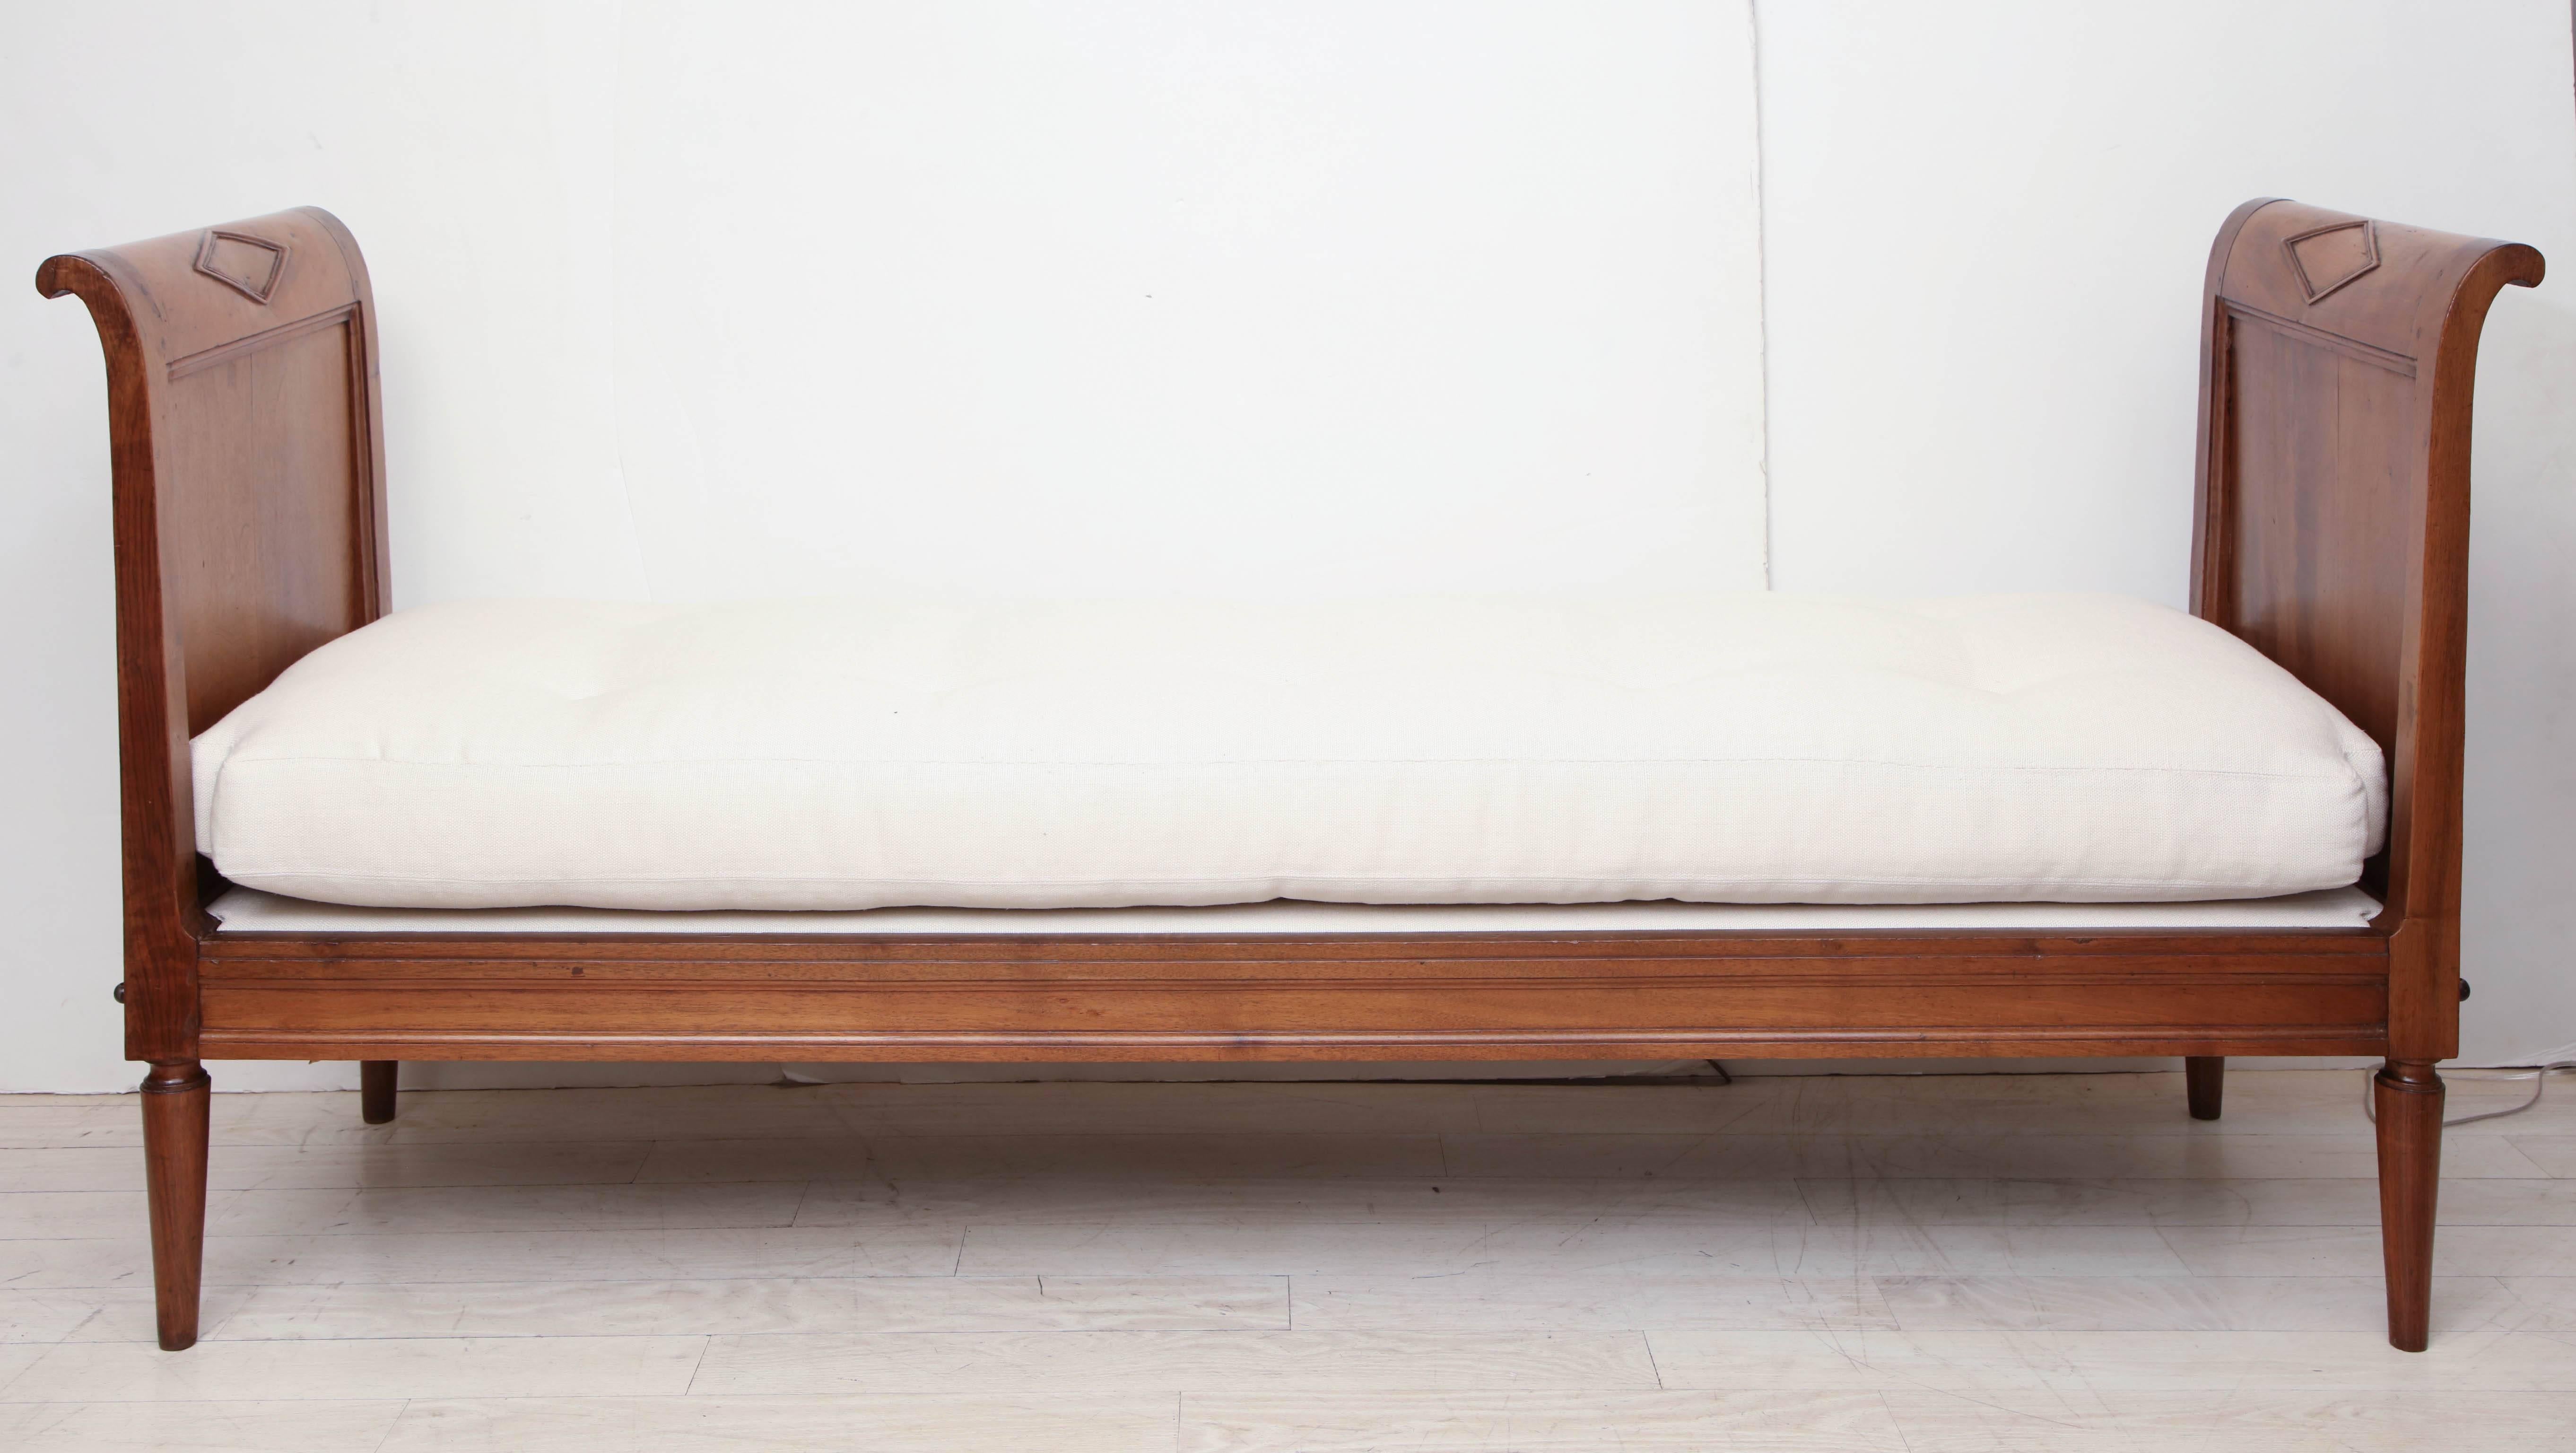 An 18th century walnut daybed with curved, paneled sides and carved detail. Newly upholstered in tufted Belgian linen.